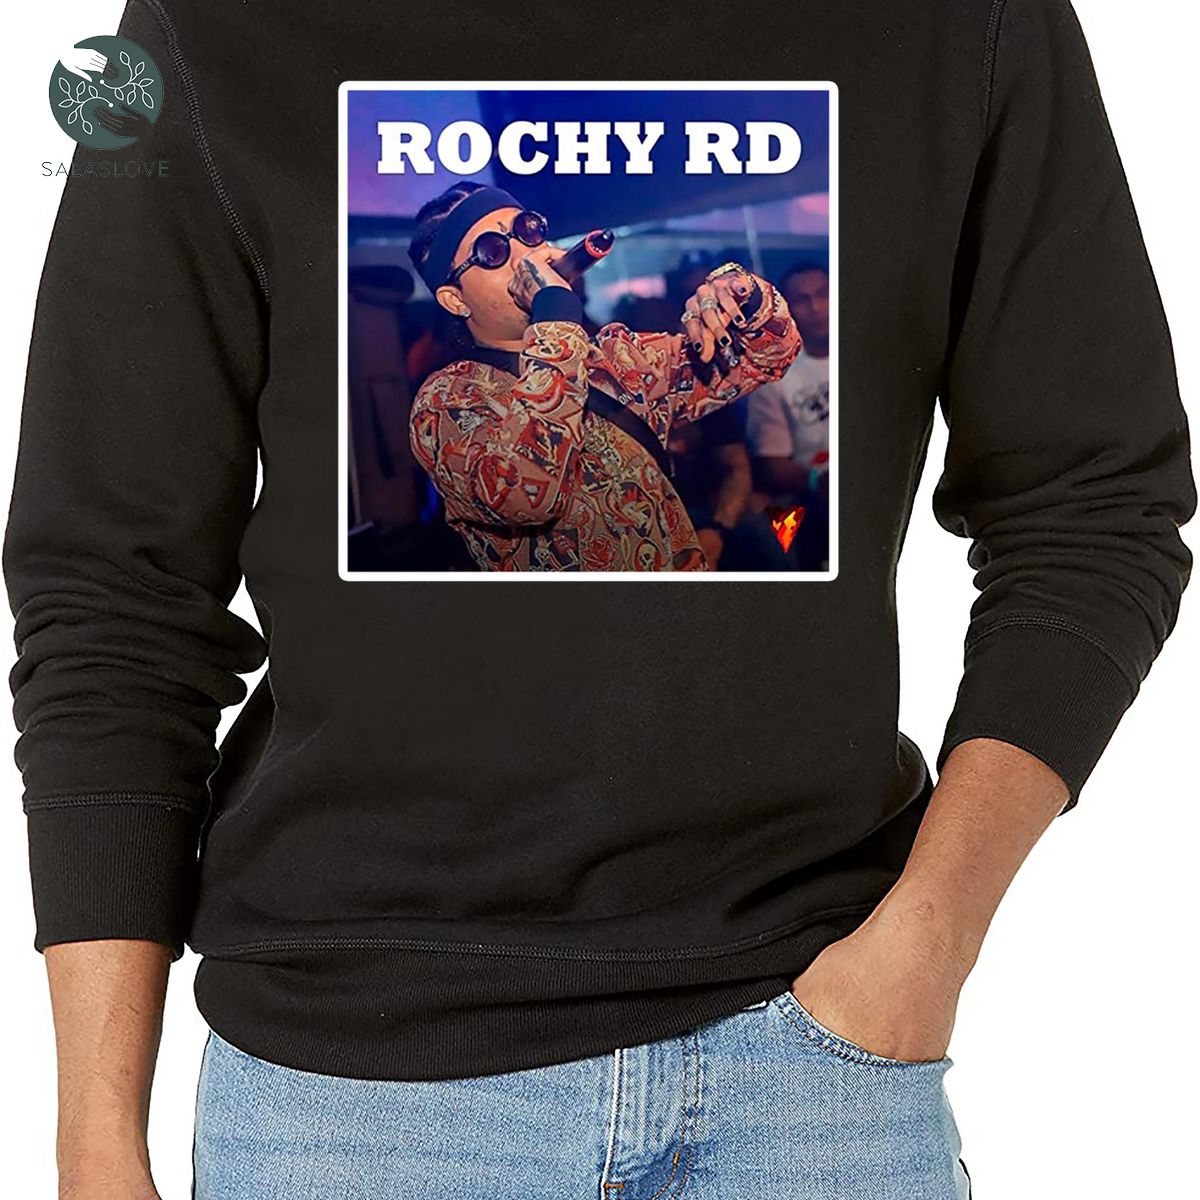 Rochy RD Based Rapper And Vocalist T-shirt